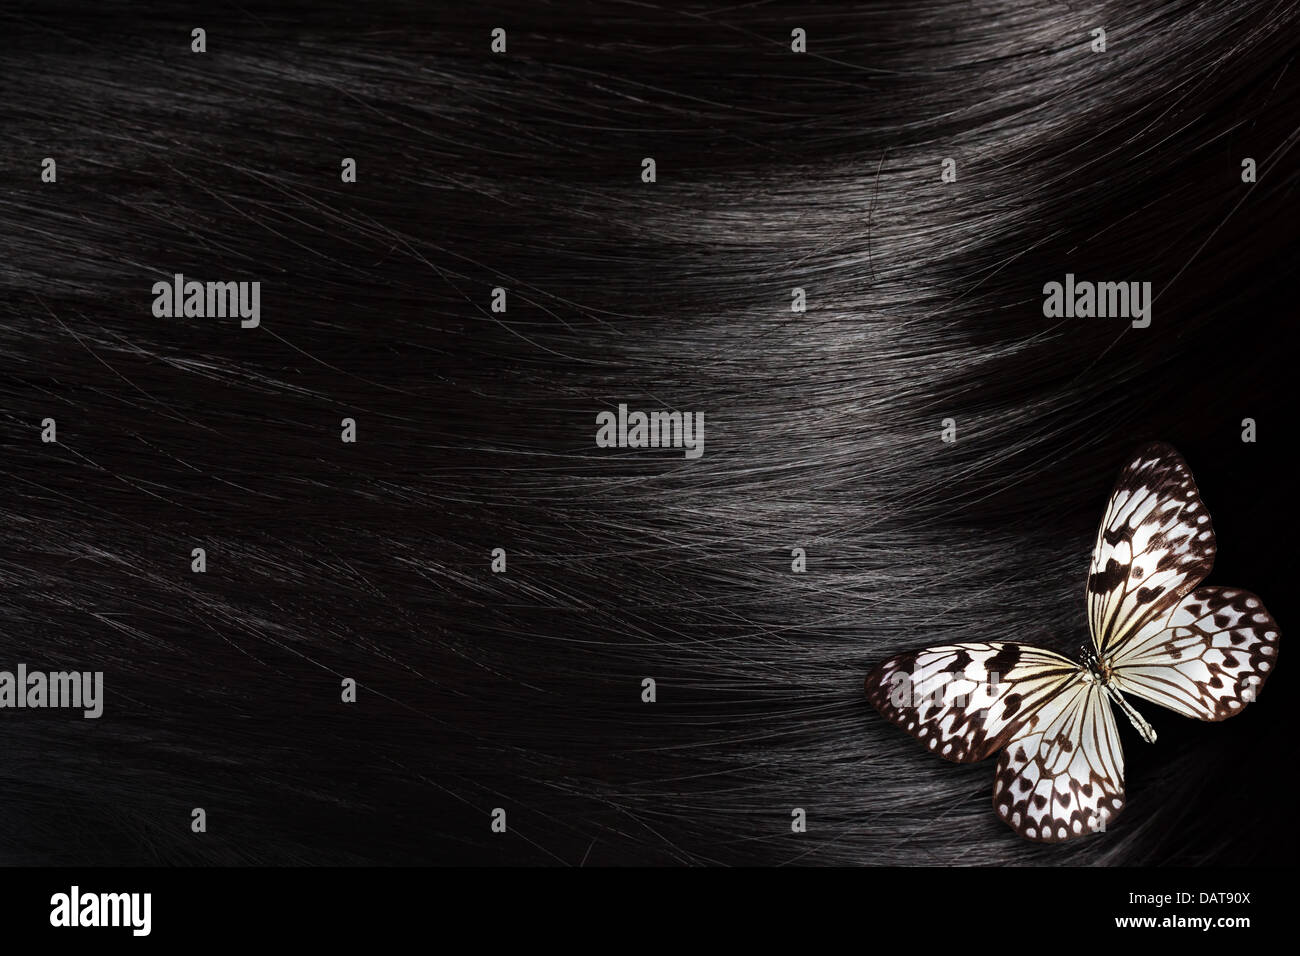 Healthy black hair with a Paper Kite butterfly - close up image Stock Photo